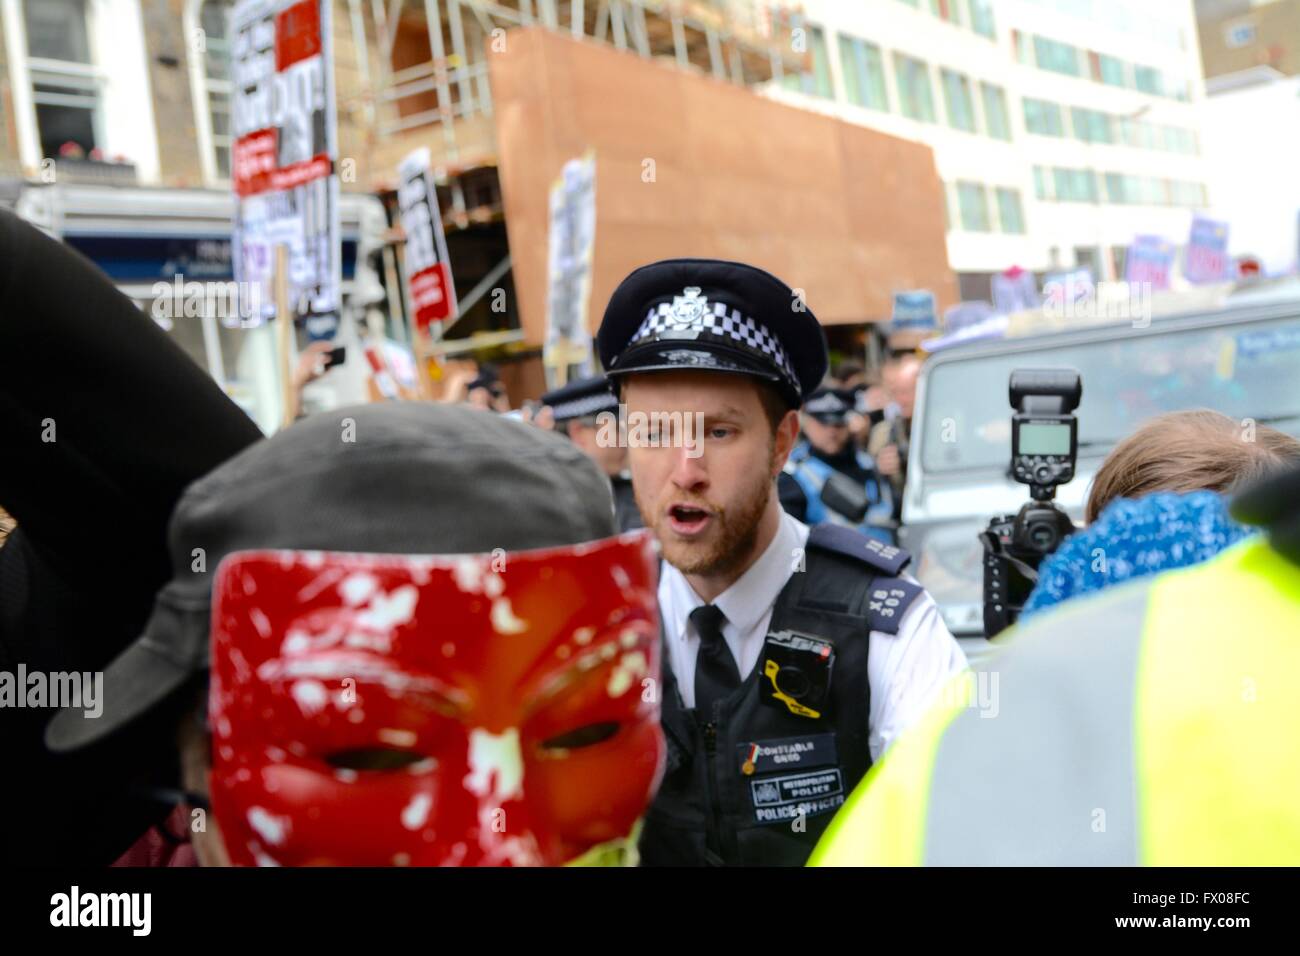 London, UK. 9th April 2016. Scuffles as police force back crowds as a car from the Conservate Party tries to leave. Credit: Marc Ward/Alamy Live News Stock Photo